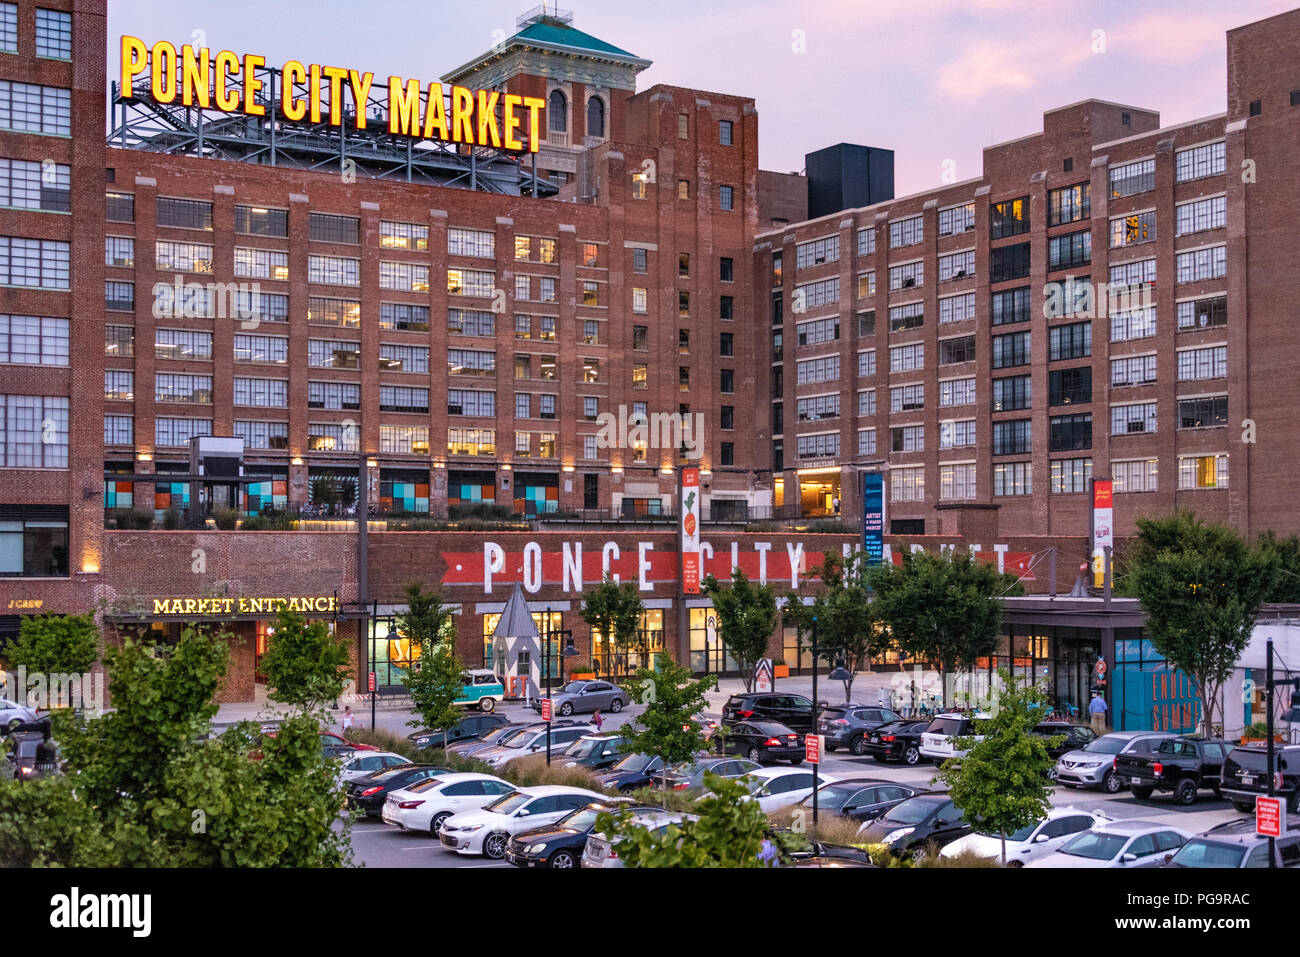 Ponce City Market, a mixed-use redevelopment complex in Atlanta, is a popular destination for shopping, dining, amusements, and music entertainment. Stock Photo